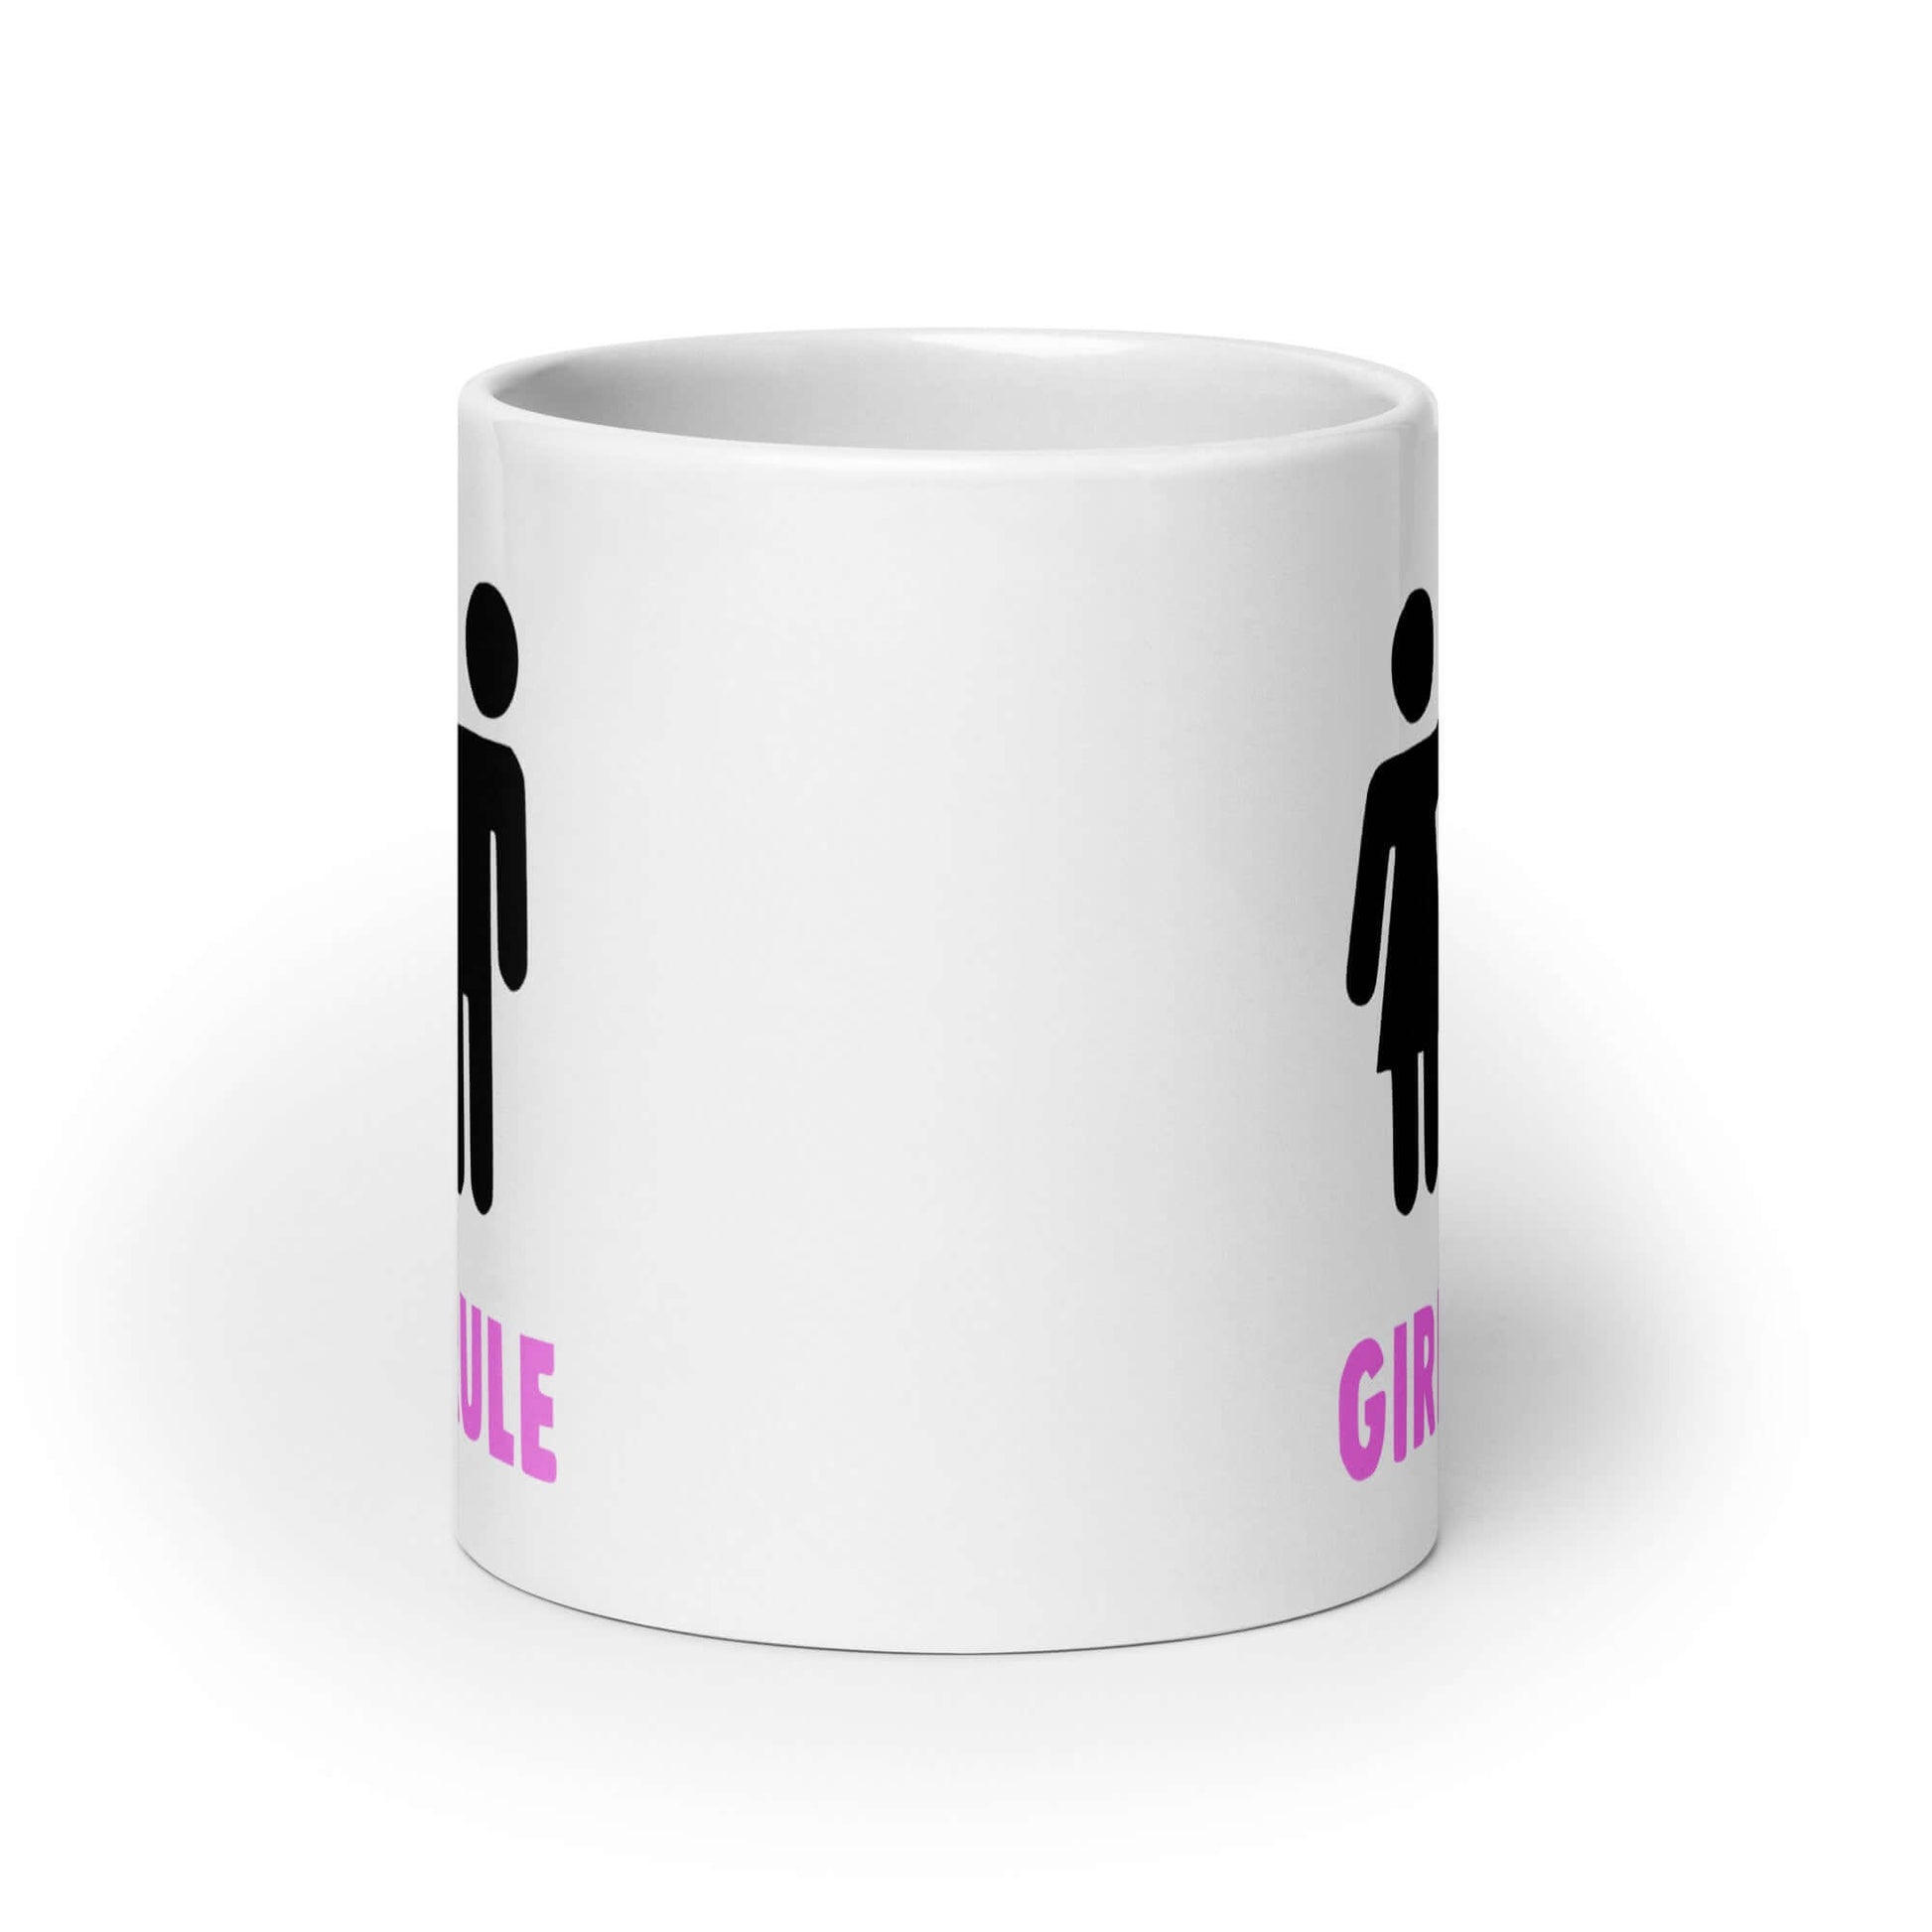 White ceramic mug with an image of a stick figure man and woman. The stick woman is punching the stick mans head off and the words Girls rule is printed beneath in hot pink. The graphics are printed on the front of the shirt..